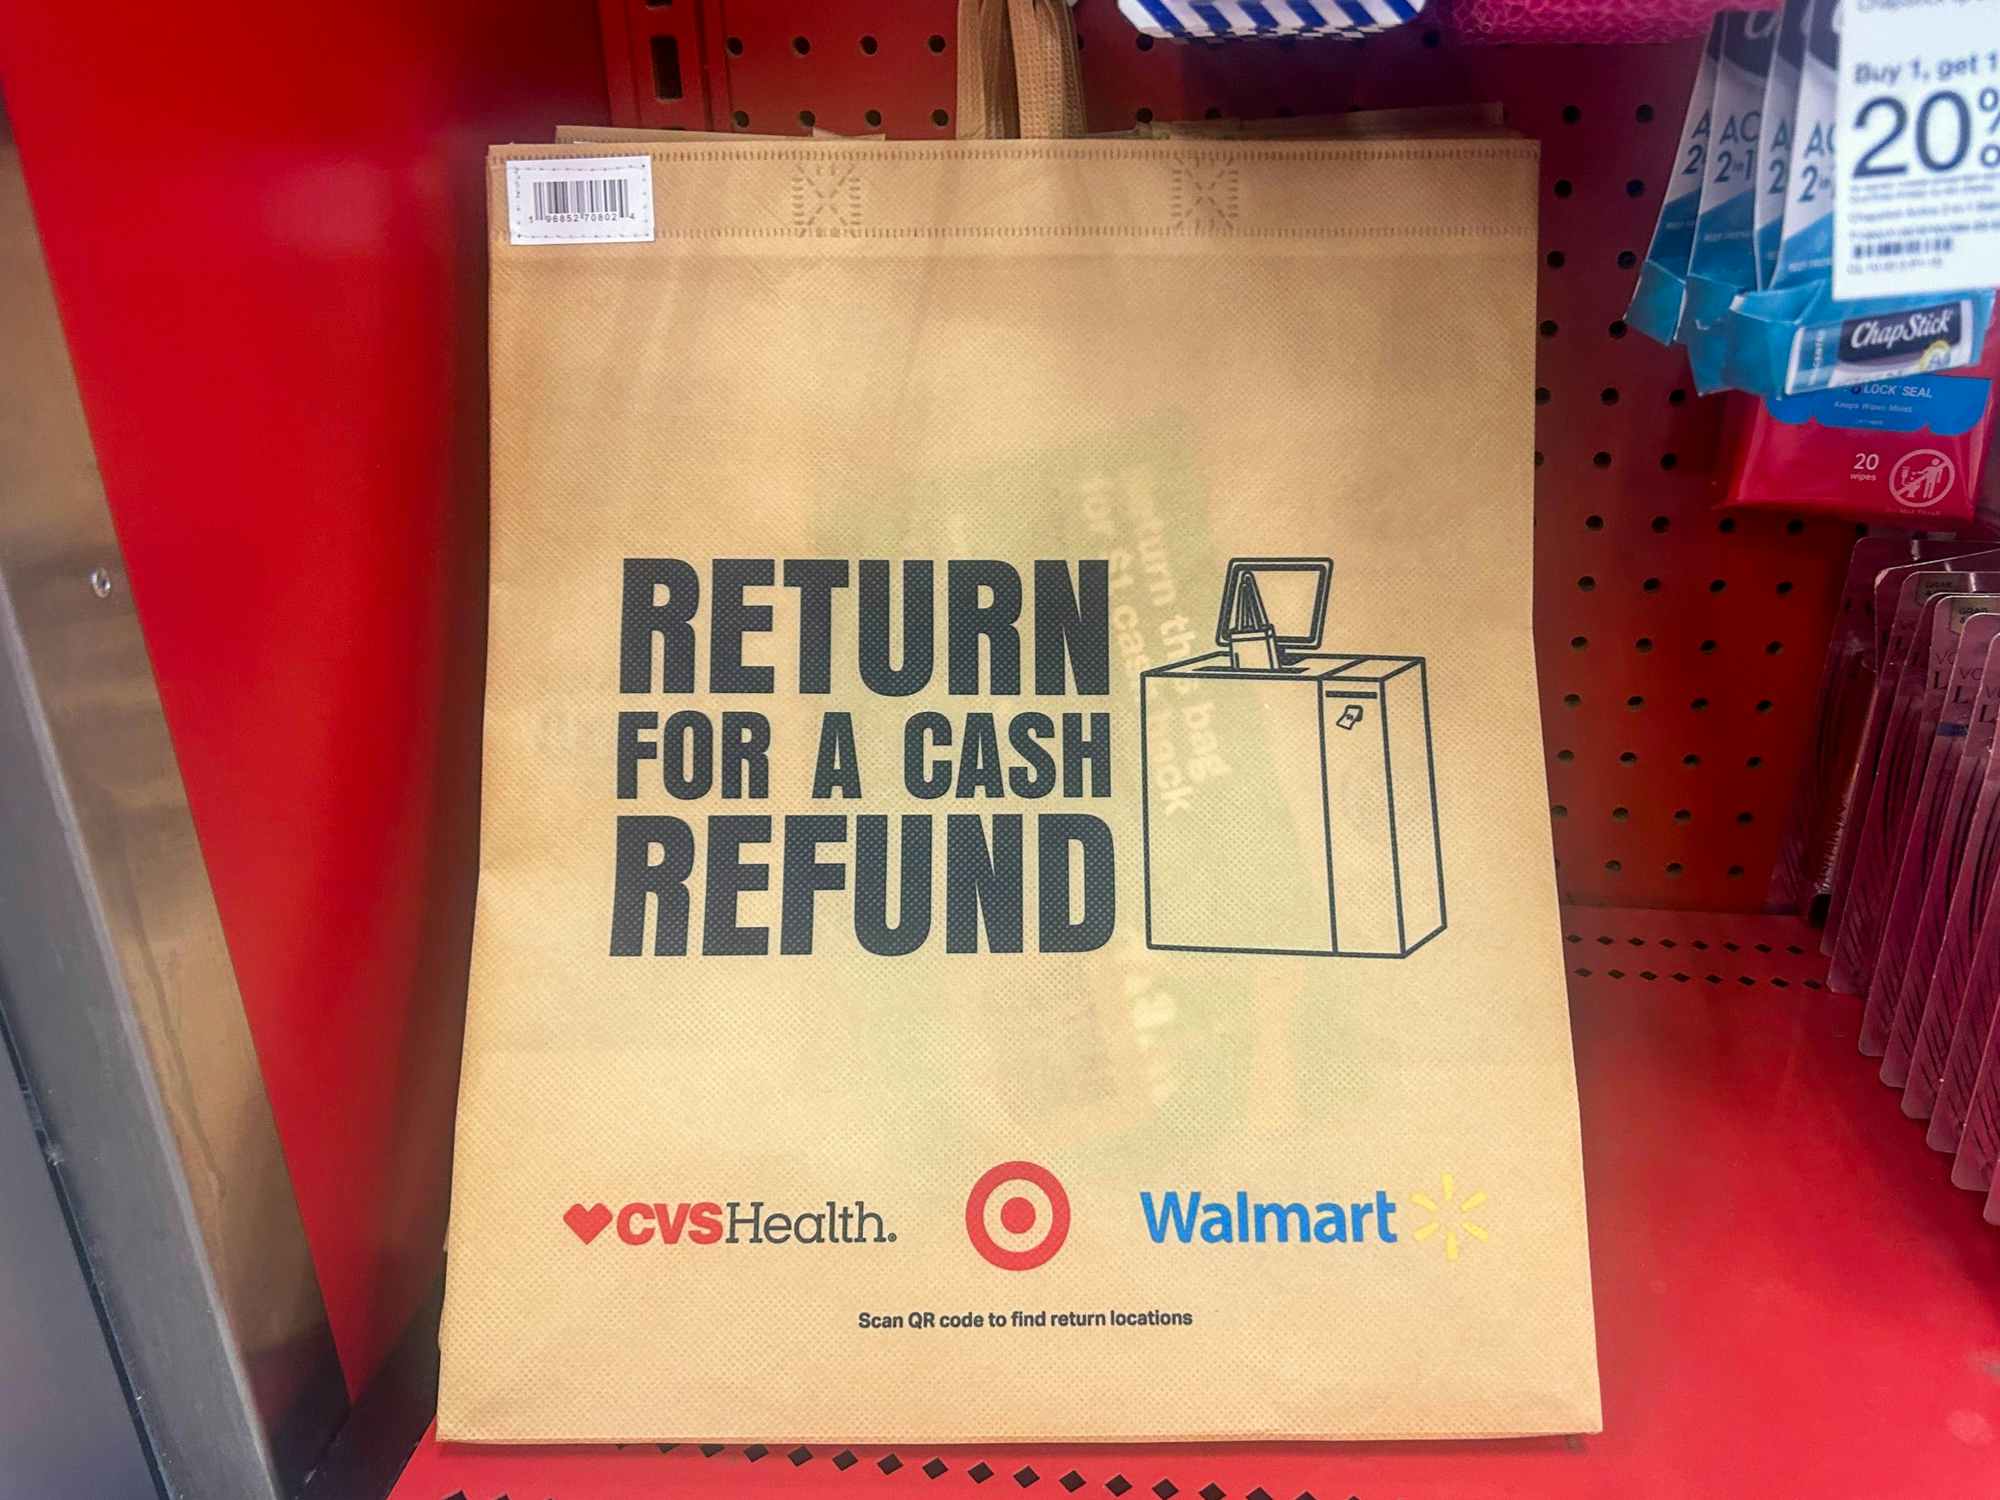 A returnable bag in Target